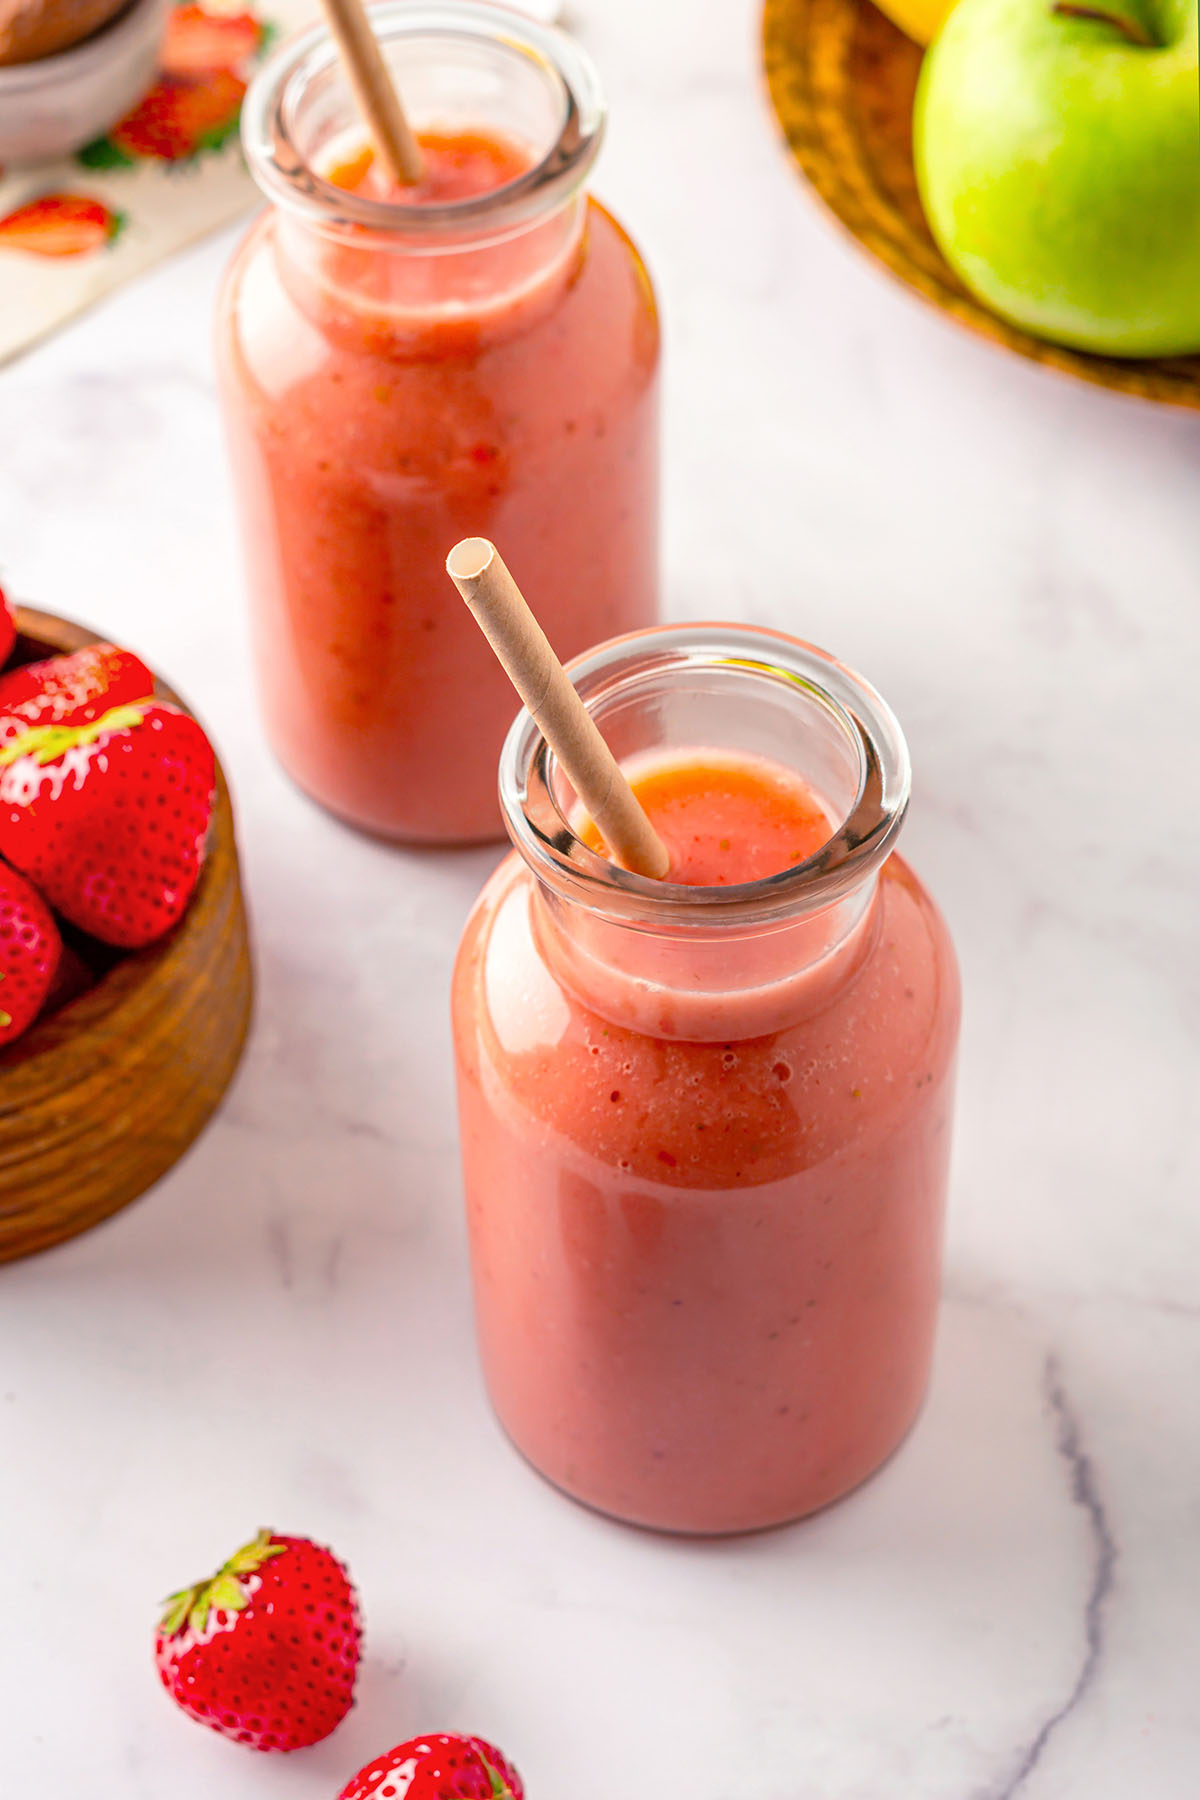 Bottles of strawberry apple smoothie with straws inside